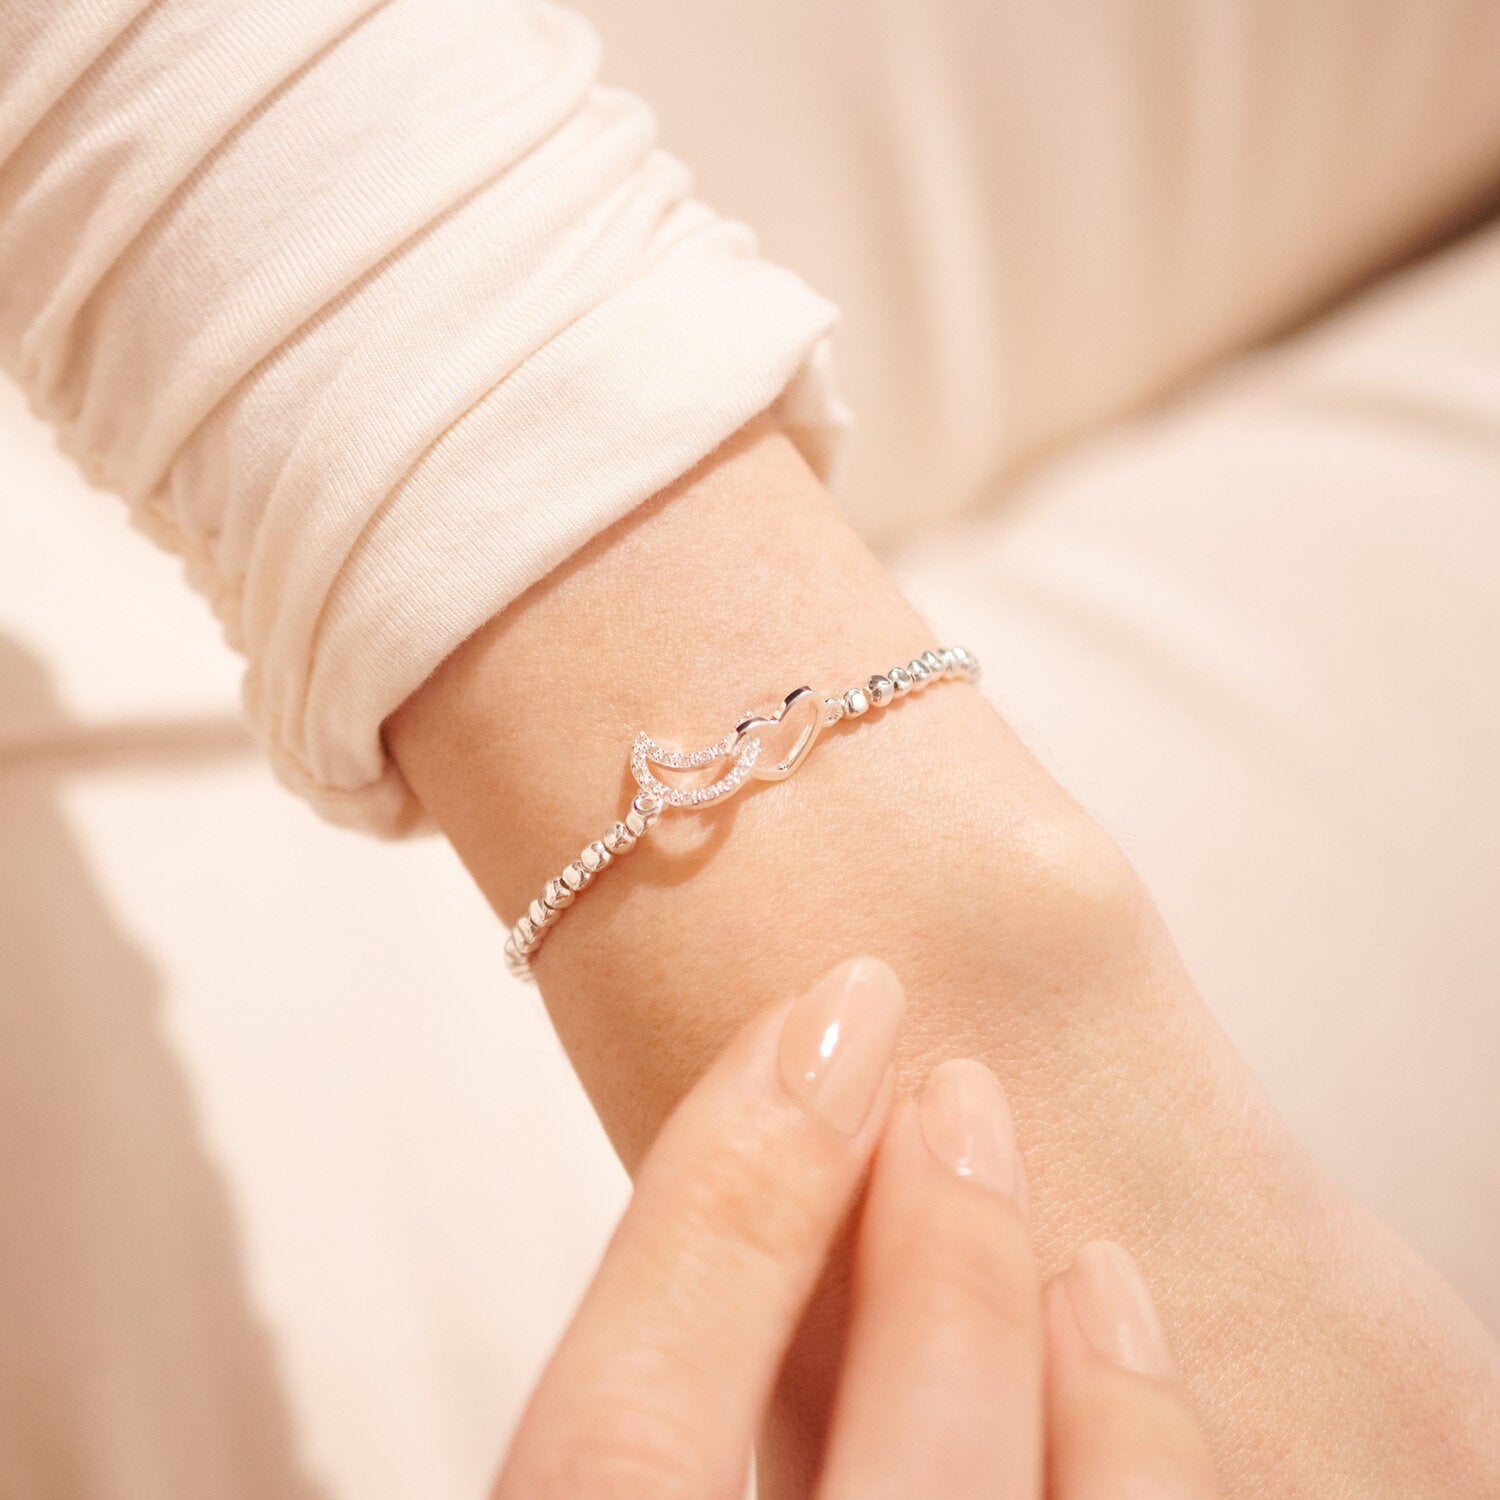 Forever Yours Bracelet - Love You To The Moon - Joma Jewellery